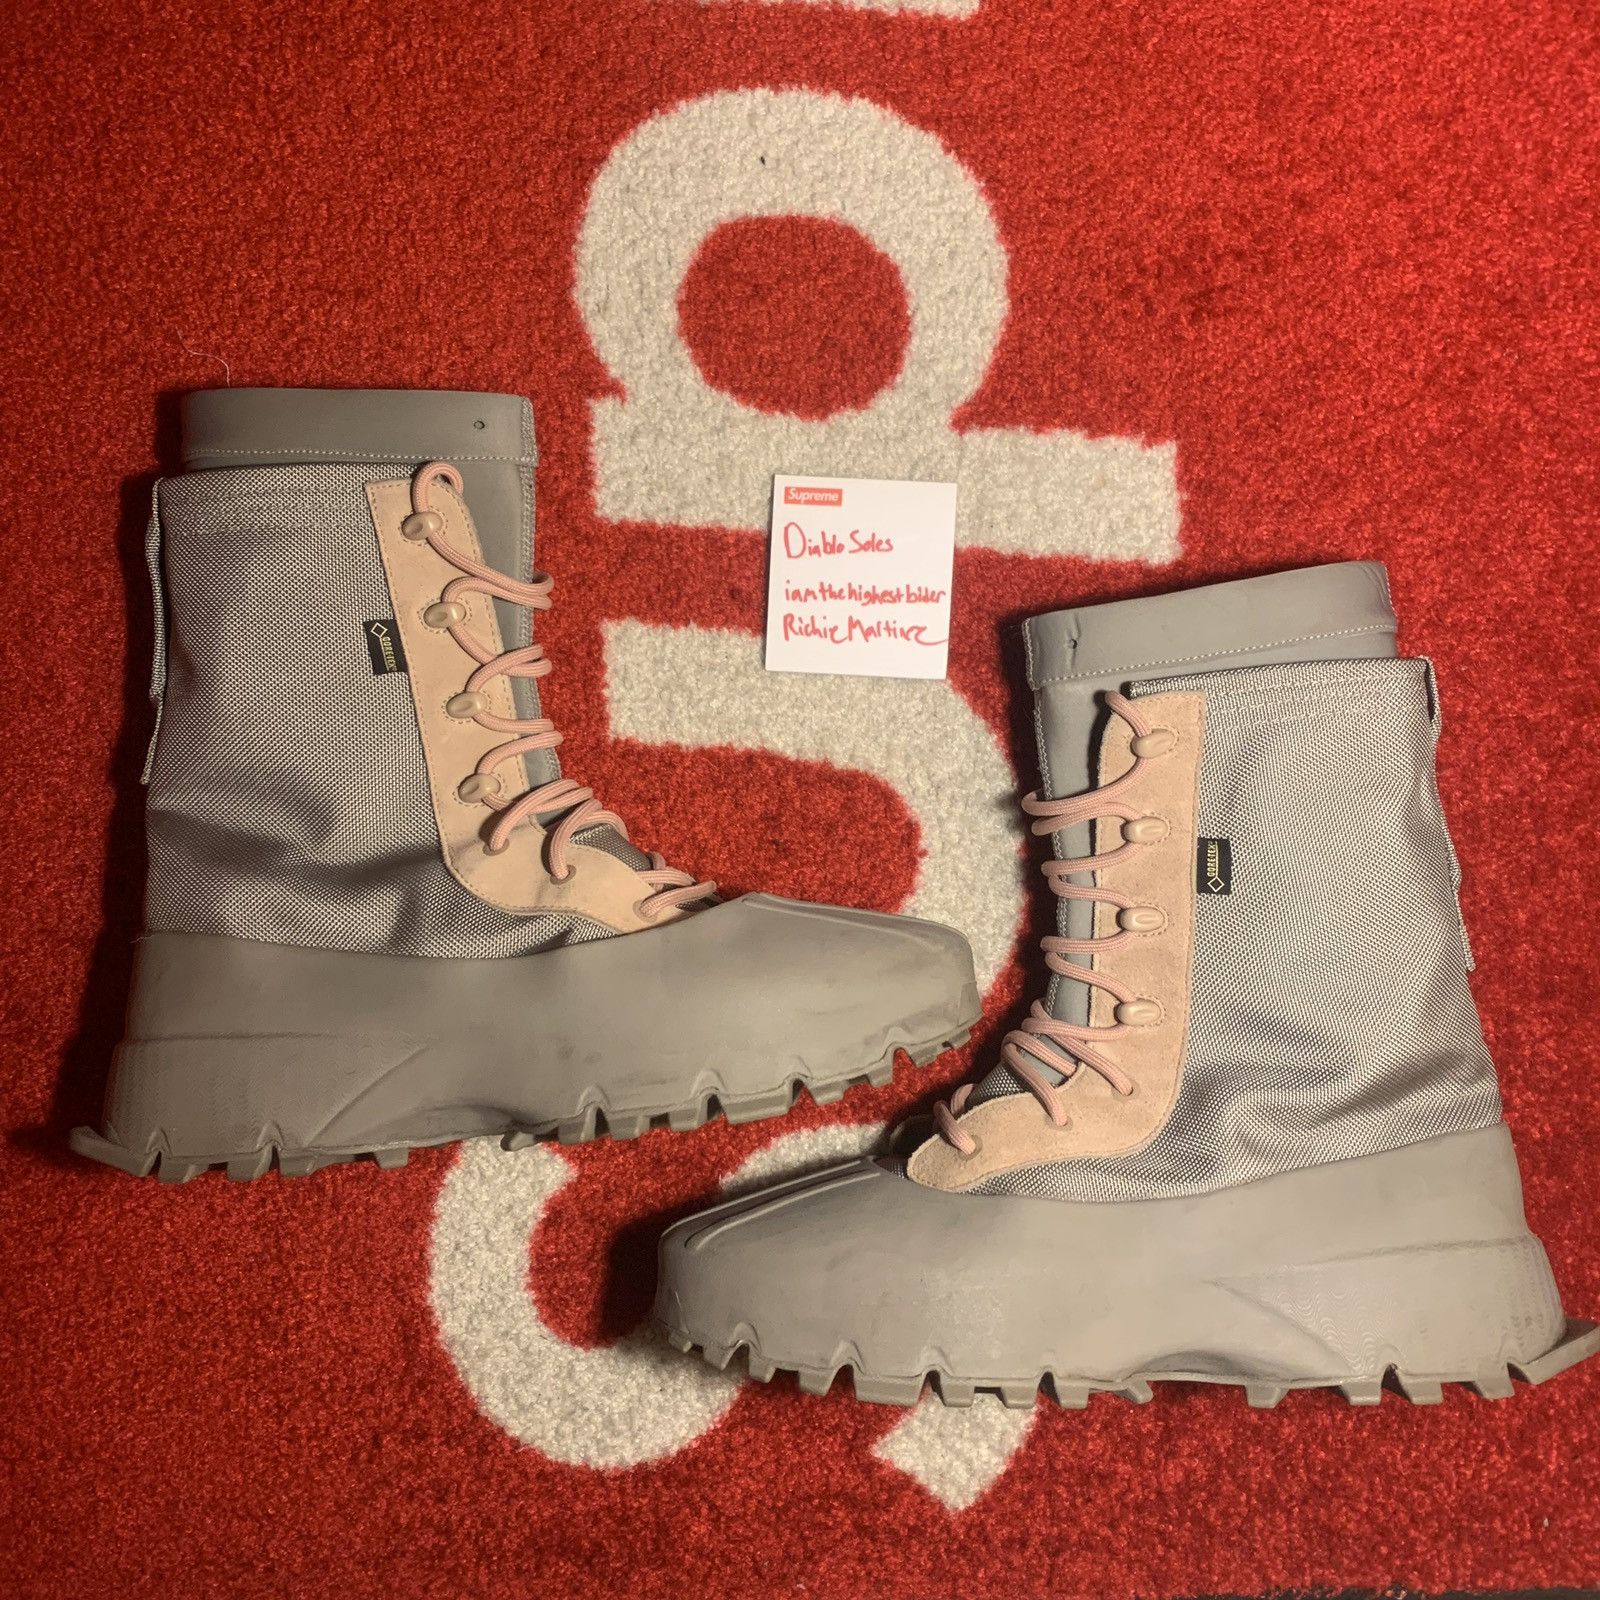 Sample Yeezy 1050s 3 Boots | Grailed